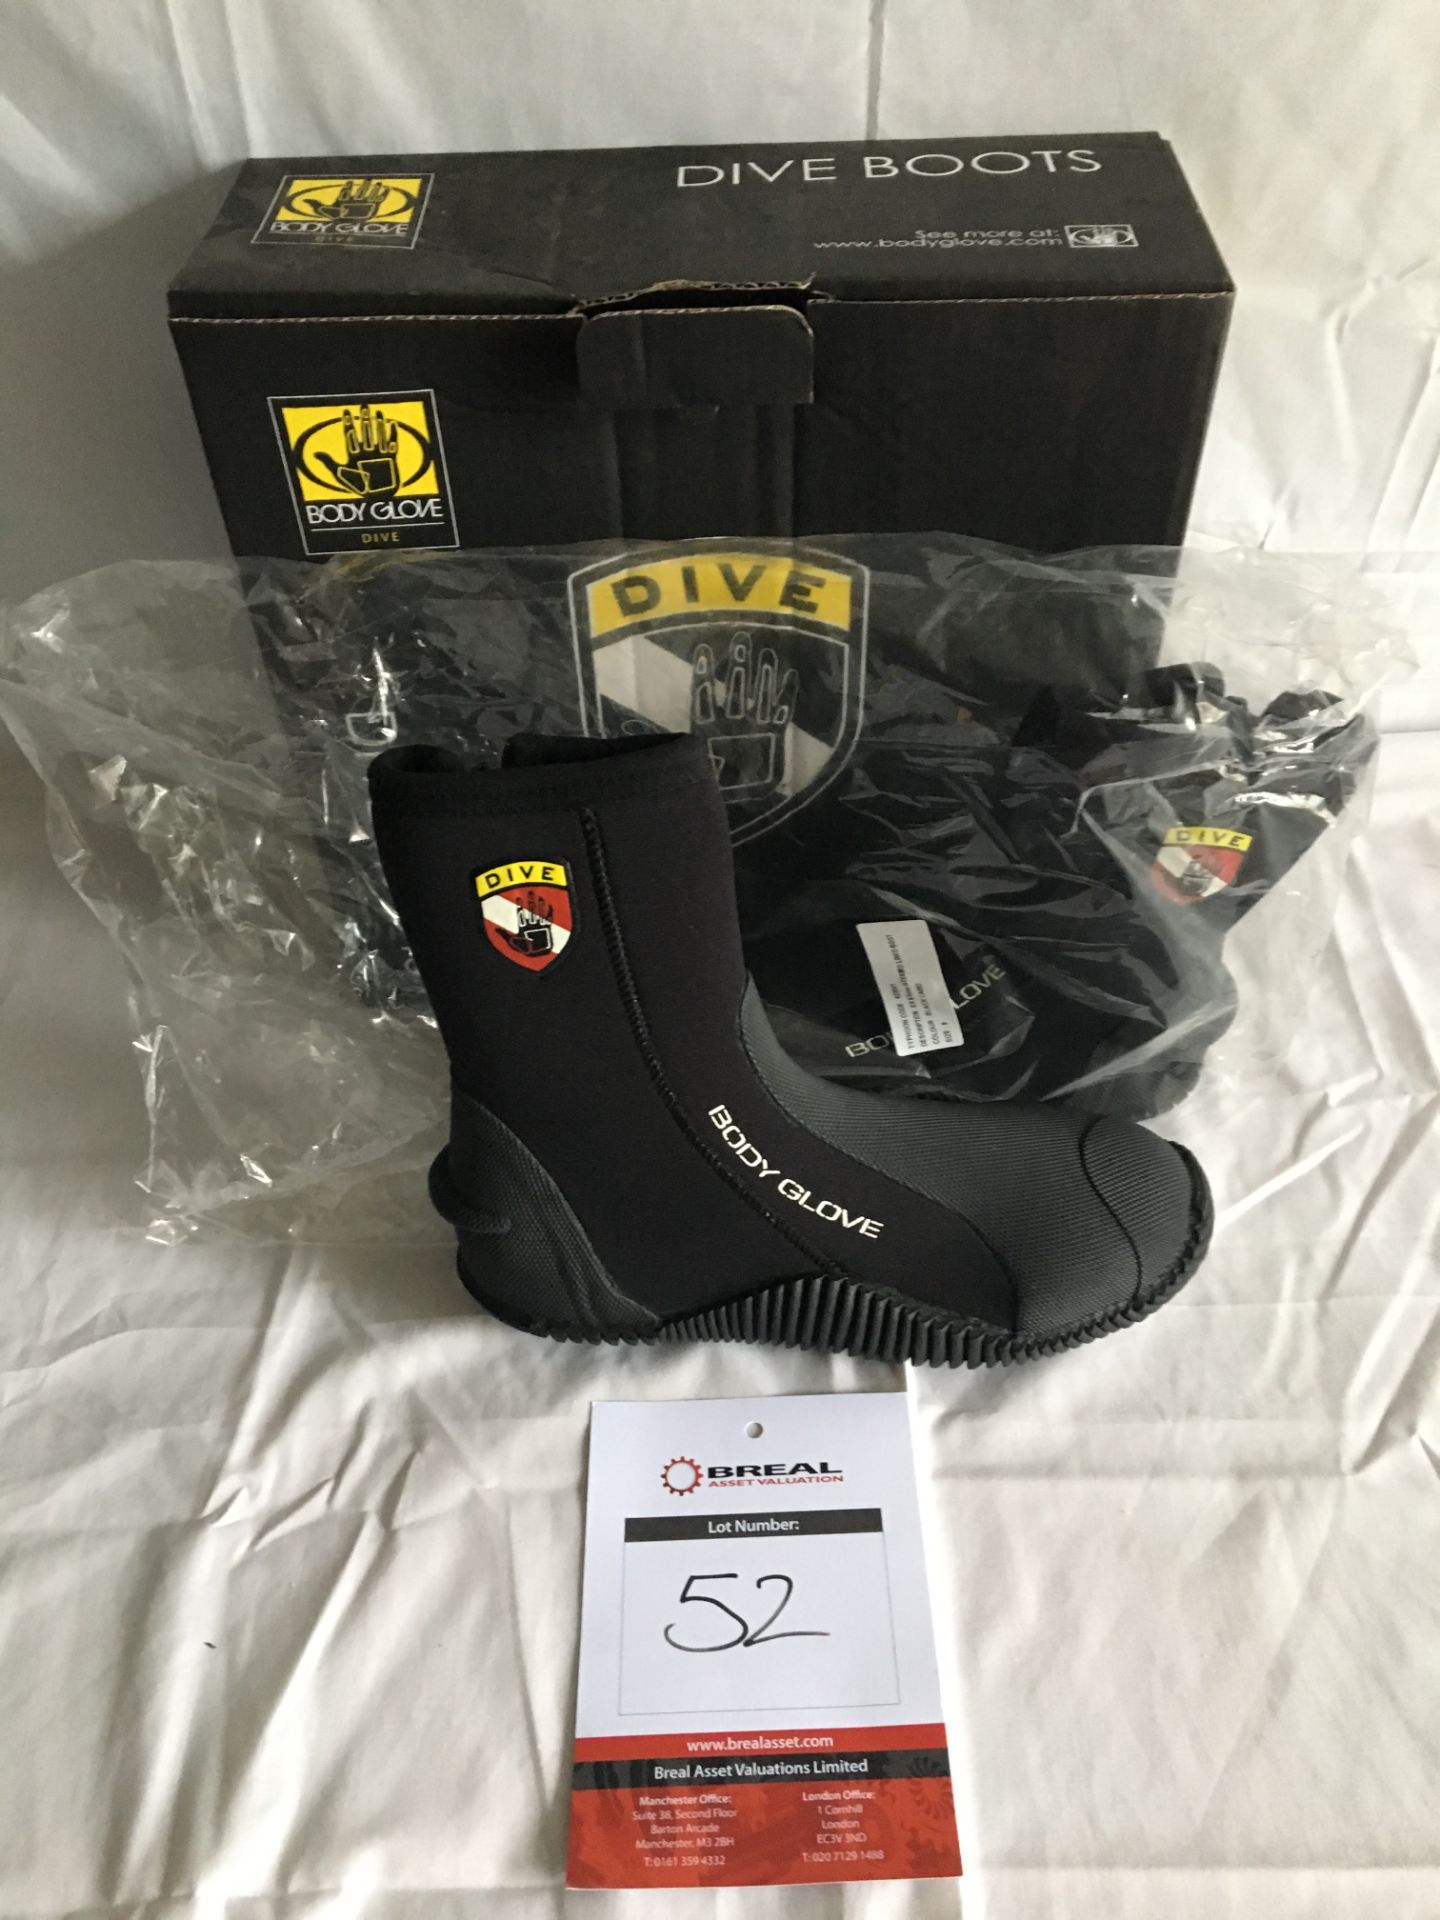 Pair of Body Glove EX 6.5mm Thermo Lined Boots in black camo, size 8 (new)